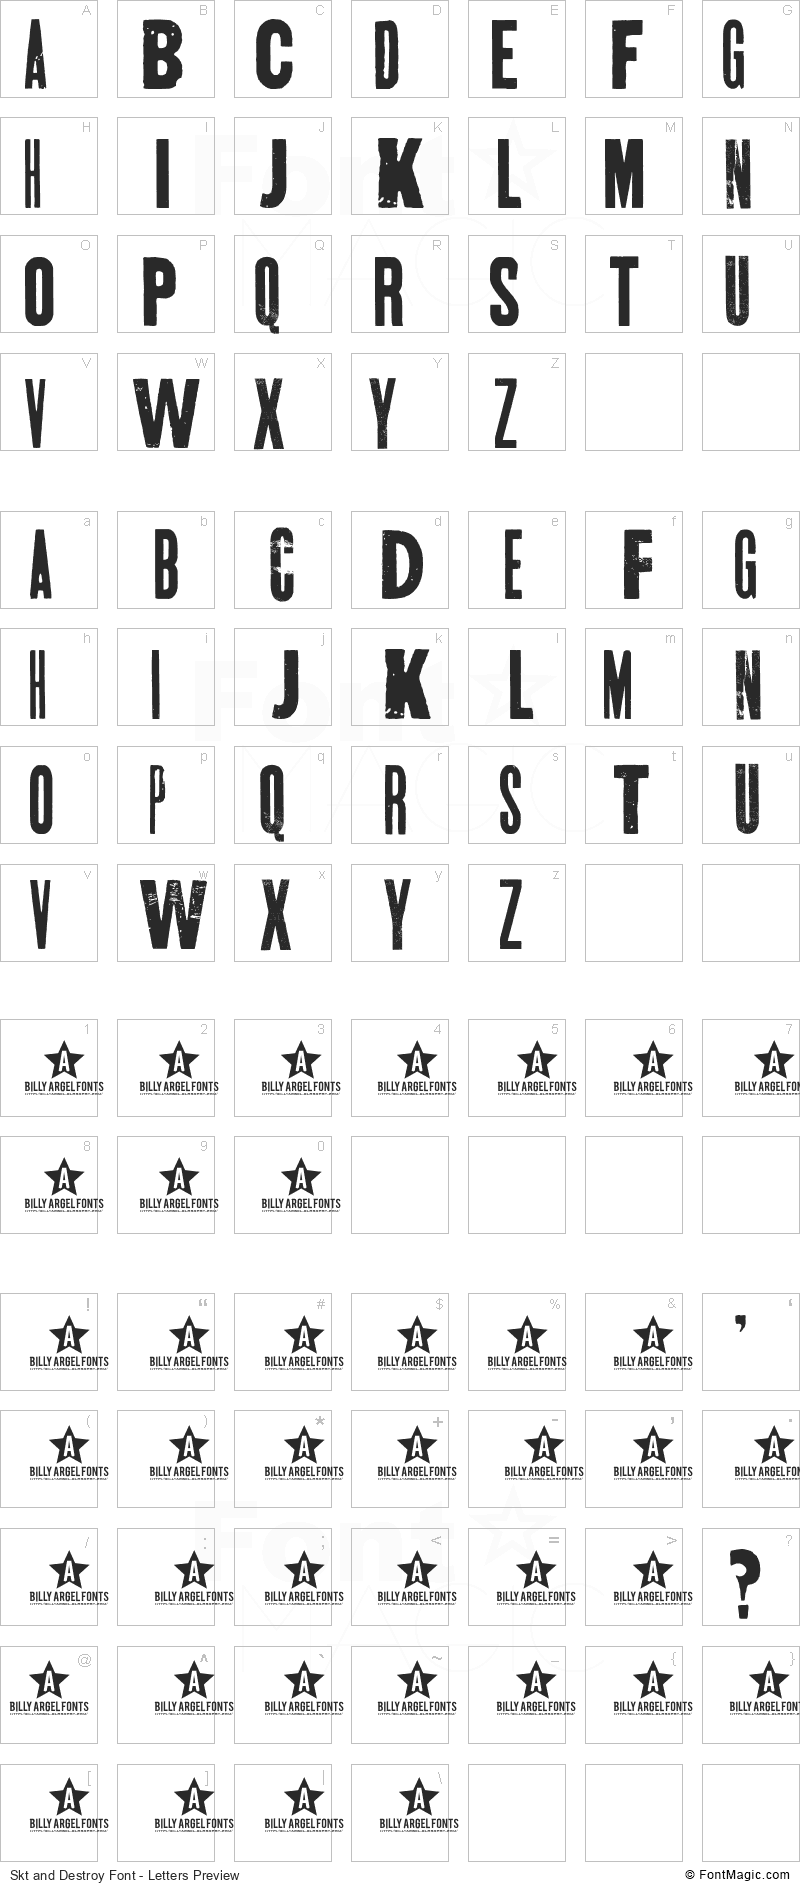 Skt and Destroy Font - All Latters Preview Chart